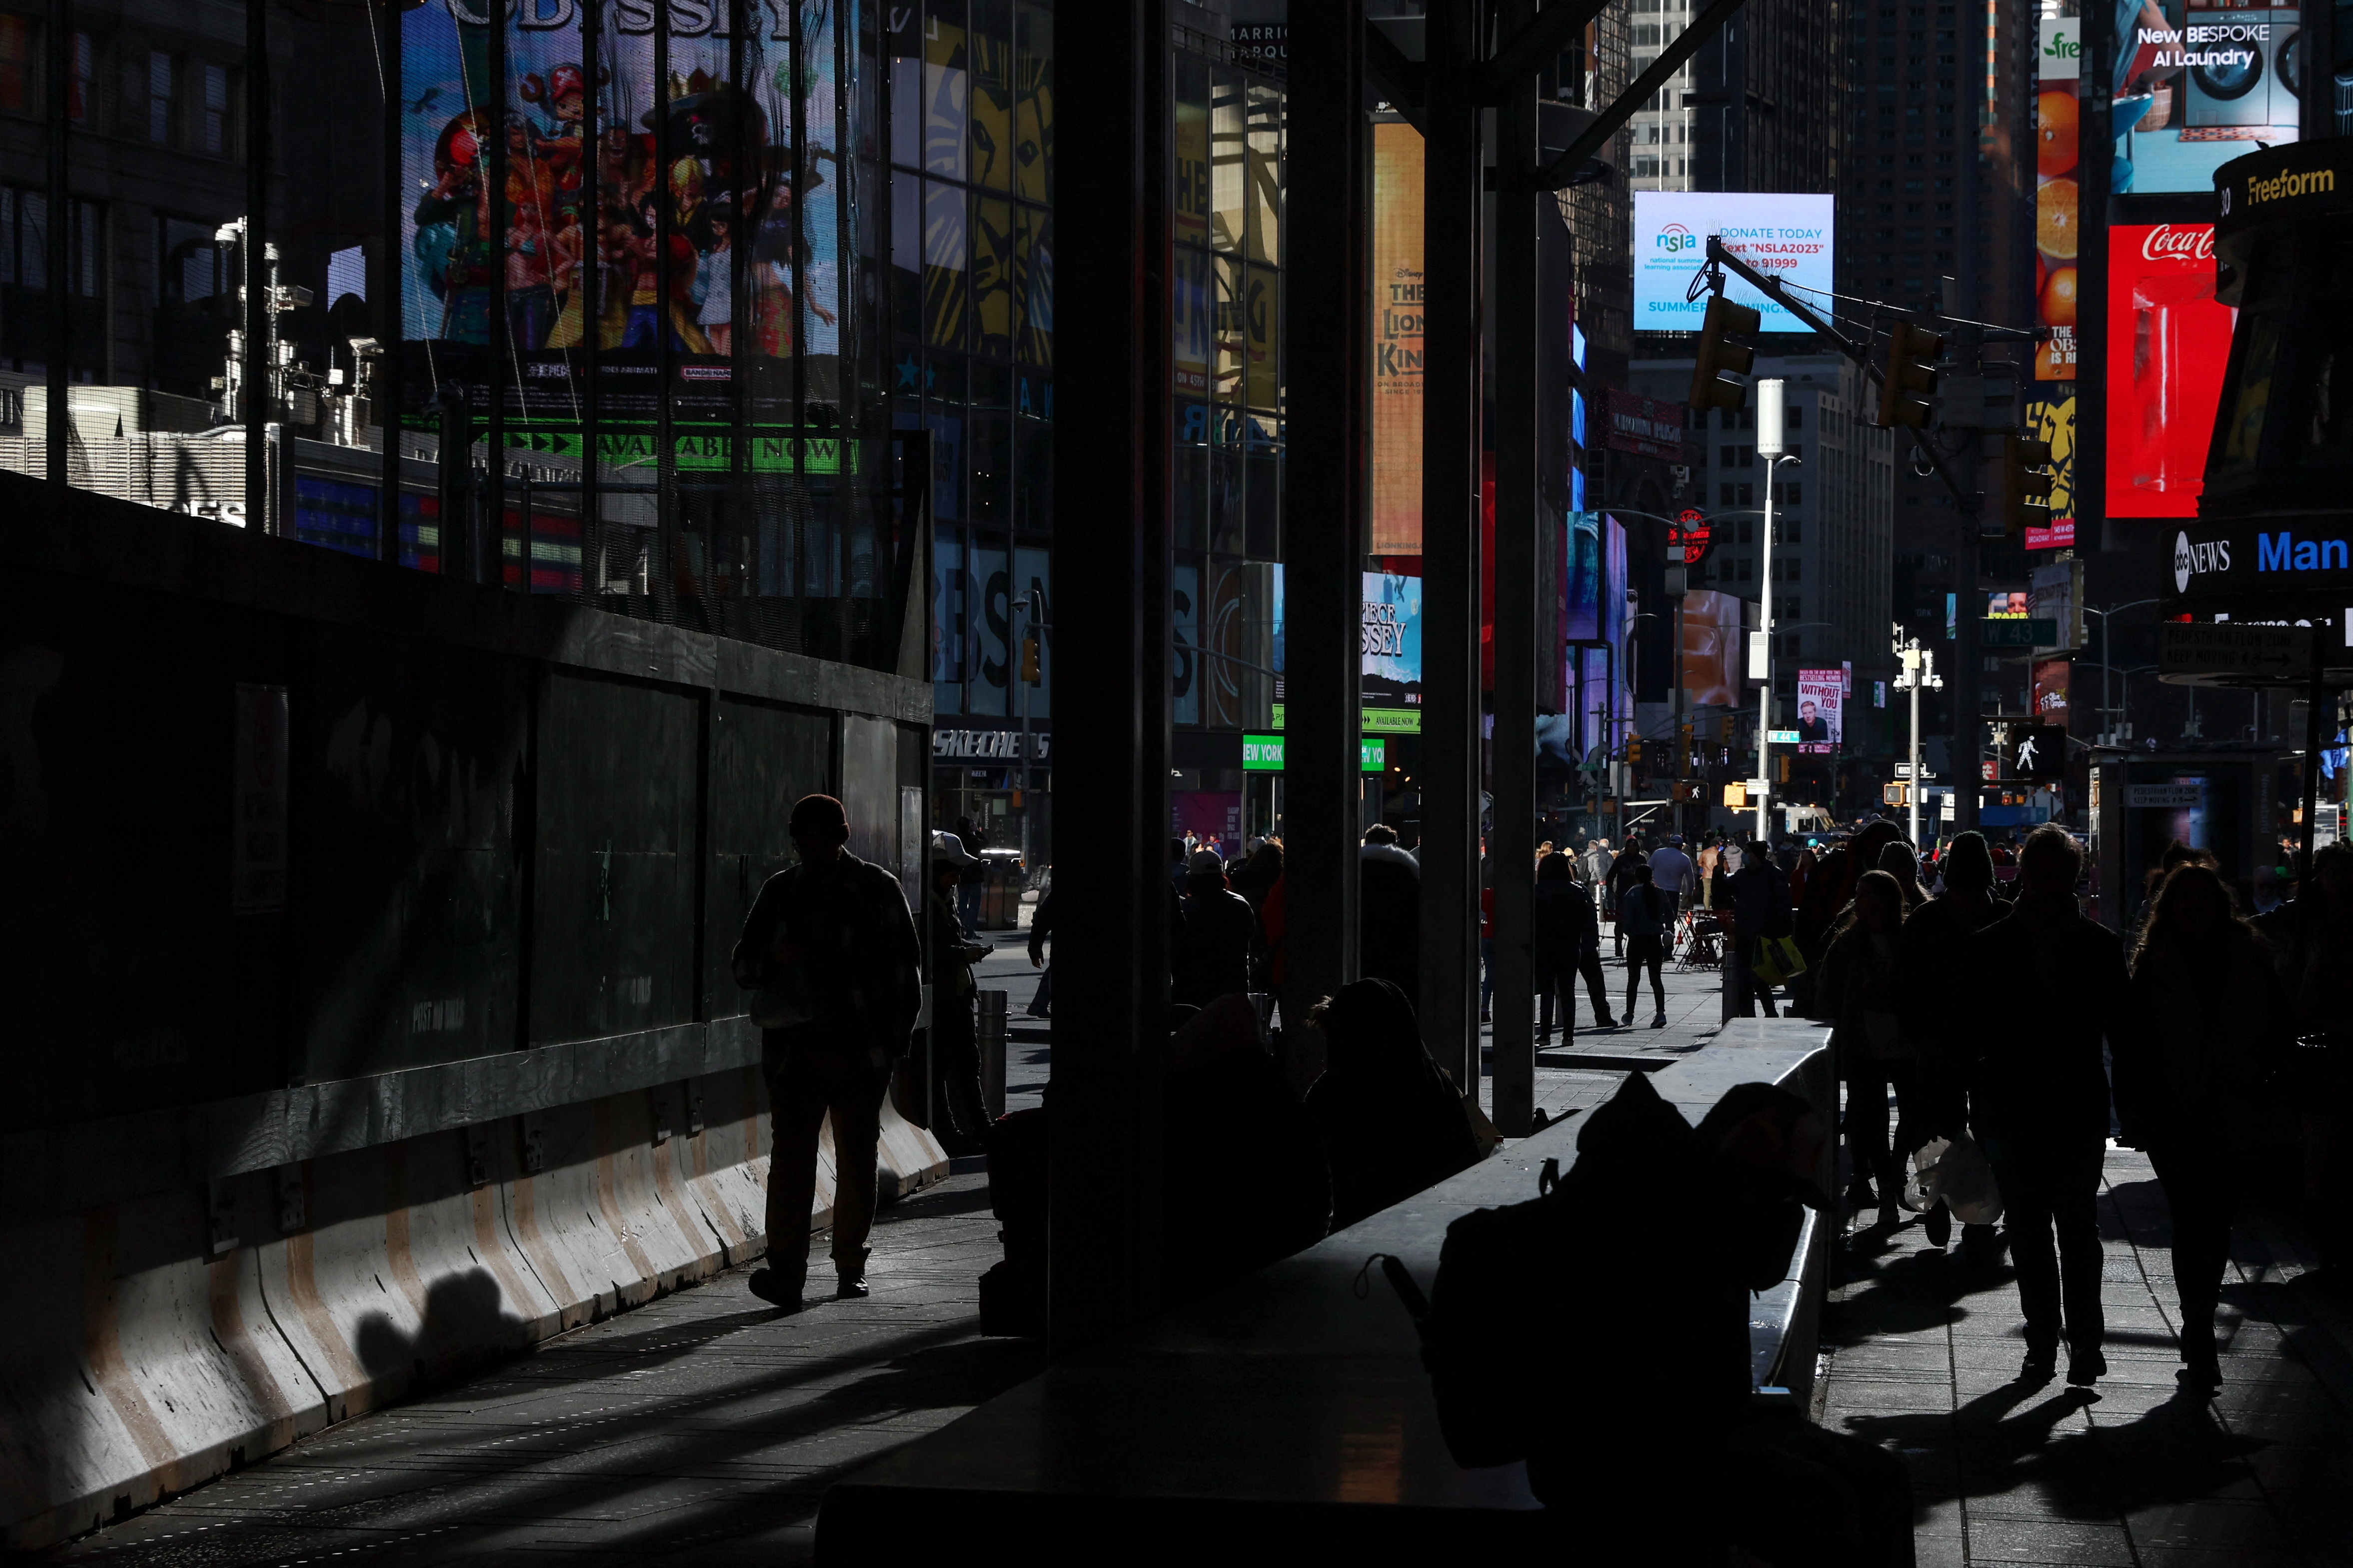 People walk through Times Square in New York City